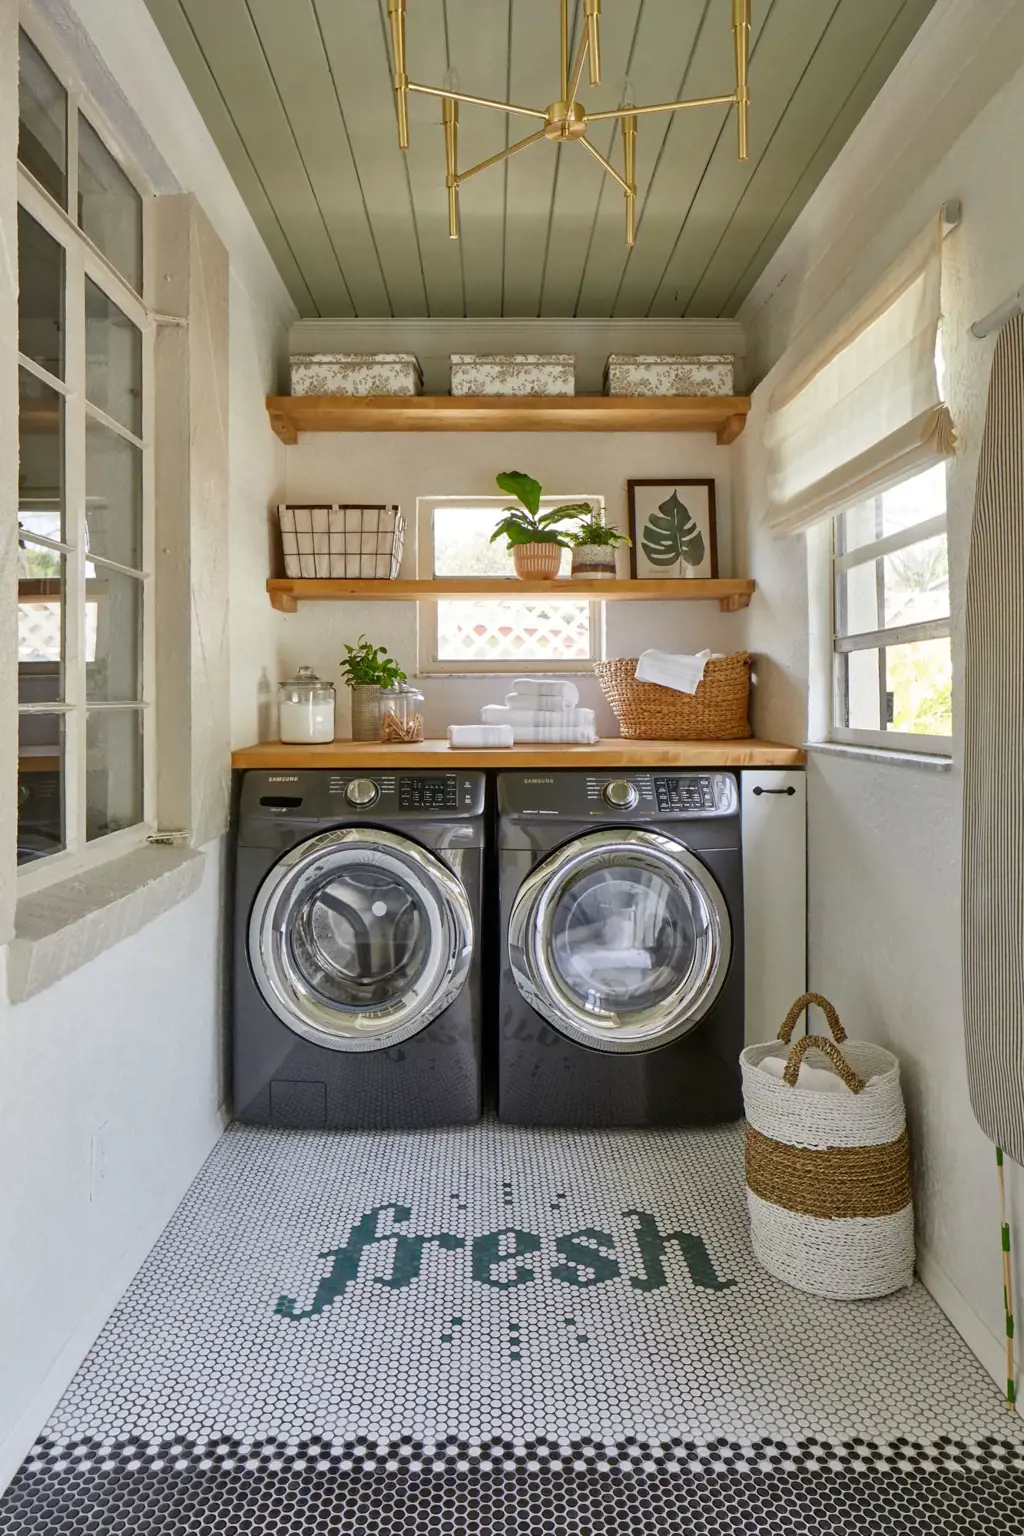 How To Properly Describe A Laundry Room | ShunShelter